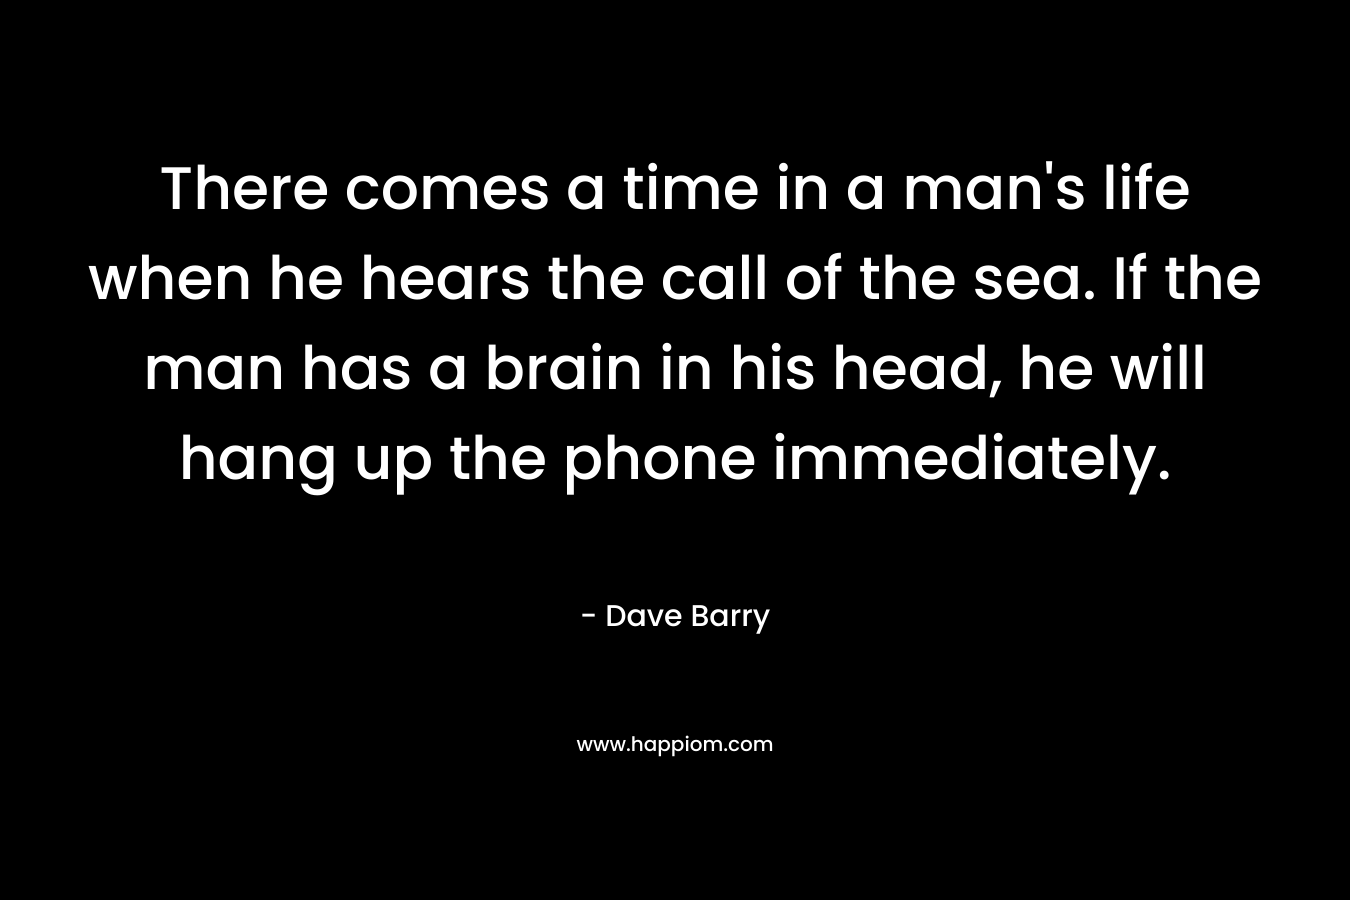 There comes a time in a man's life when he hears the call of the sea. If the man has a brain in his head, he will hang up the phone immediately.